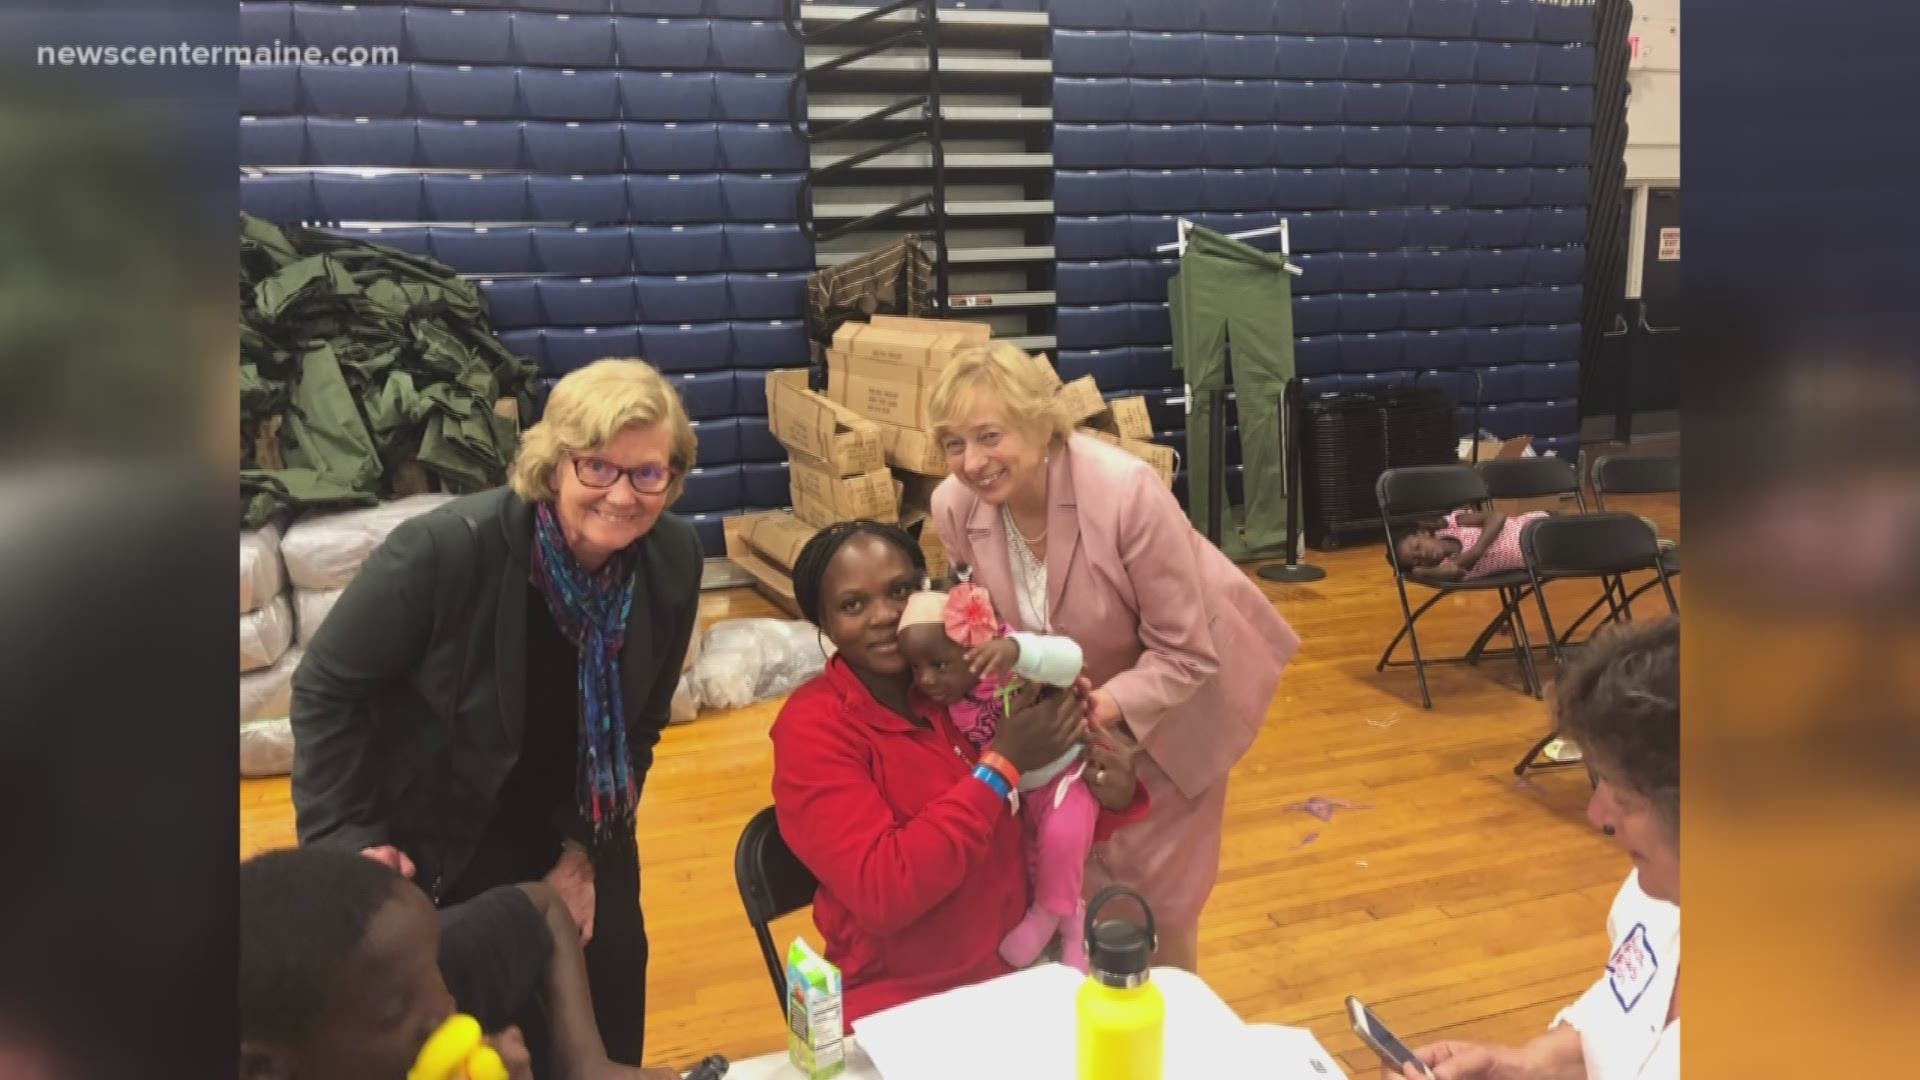 Gov. Janet Mills and Rep. Chellie Pingree visited asylum seekers at the Portland Expo on Friday.